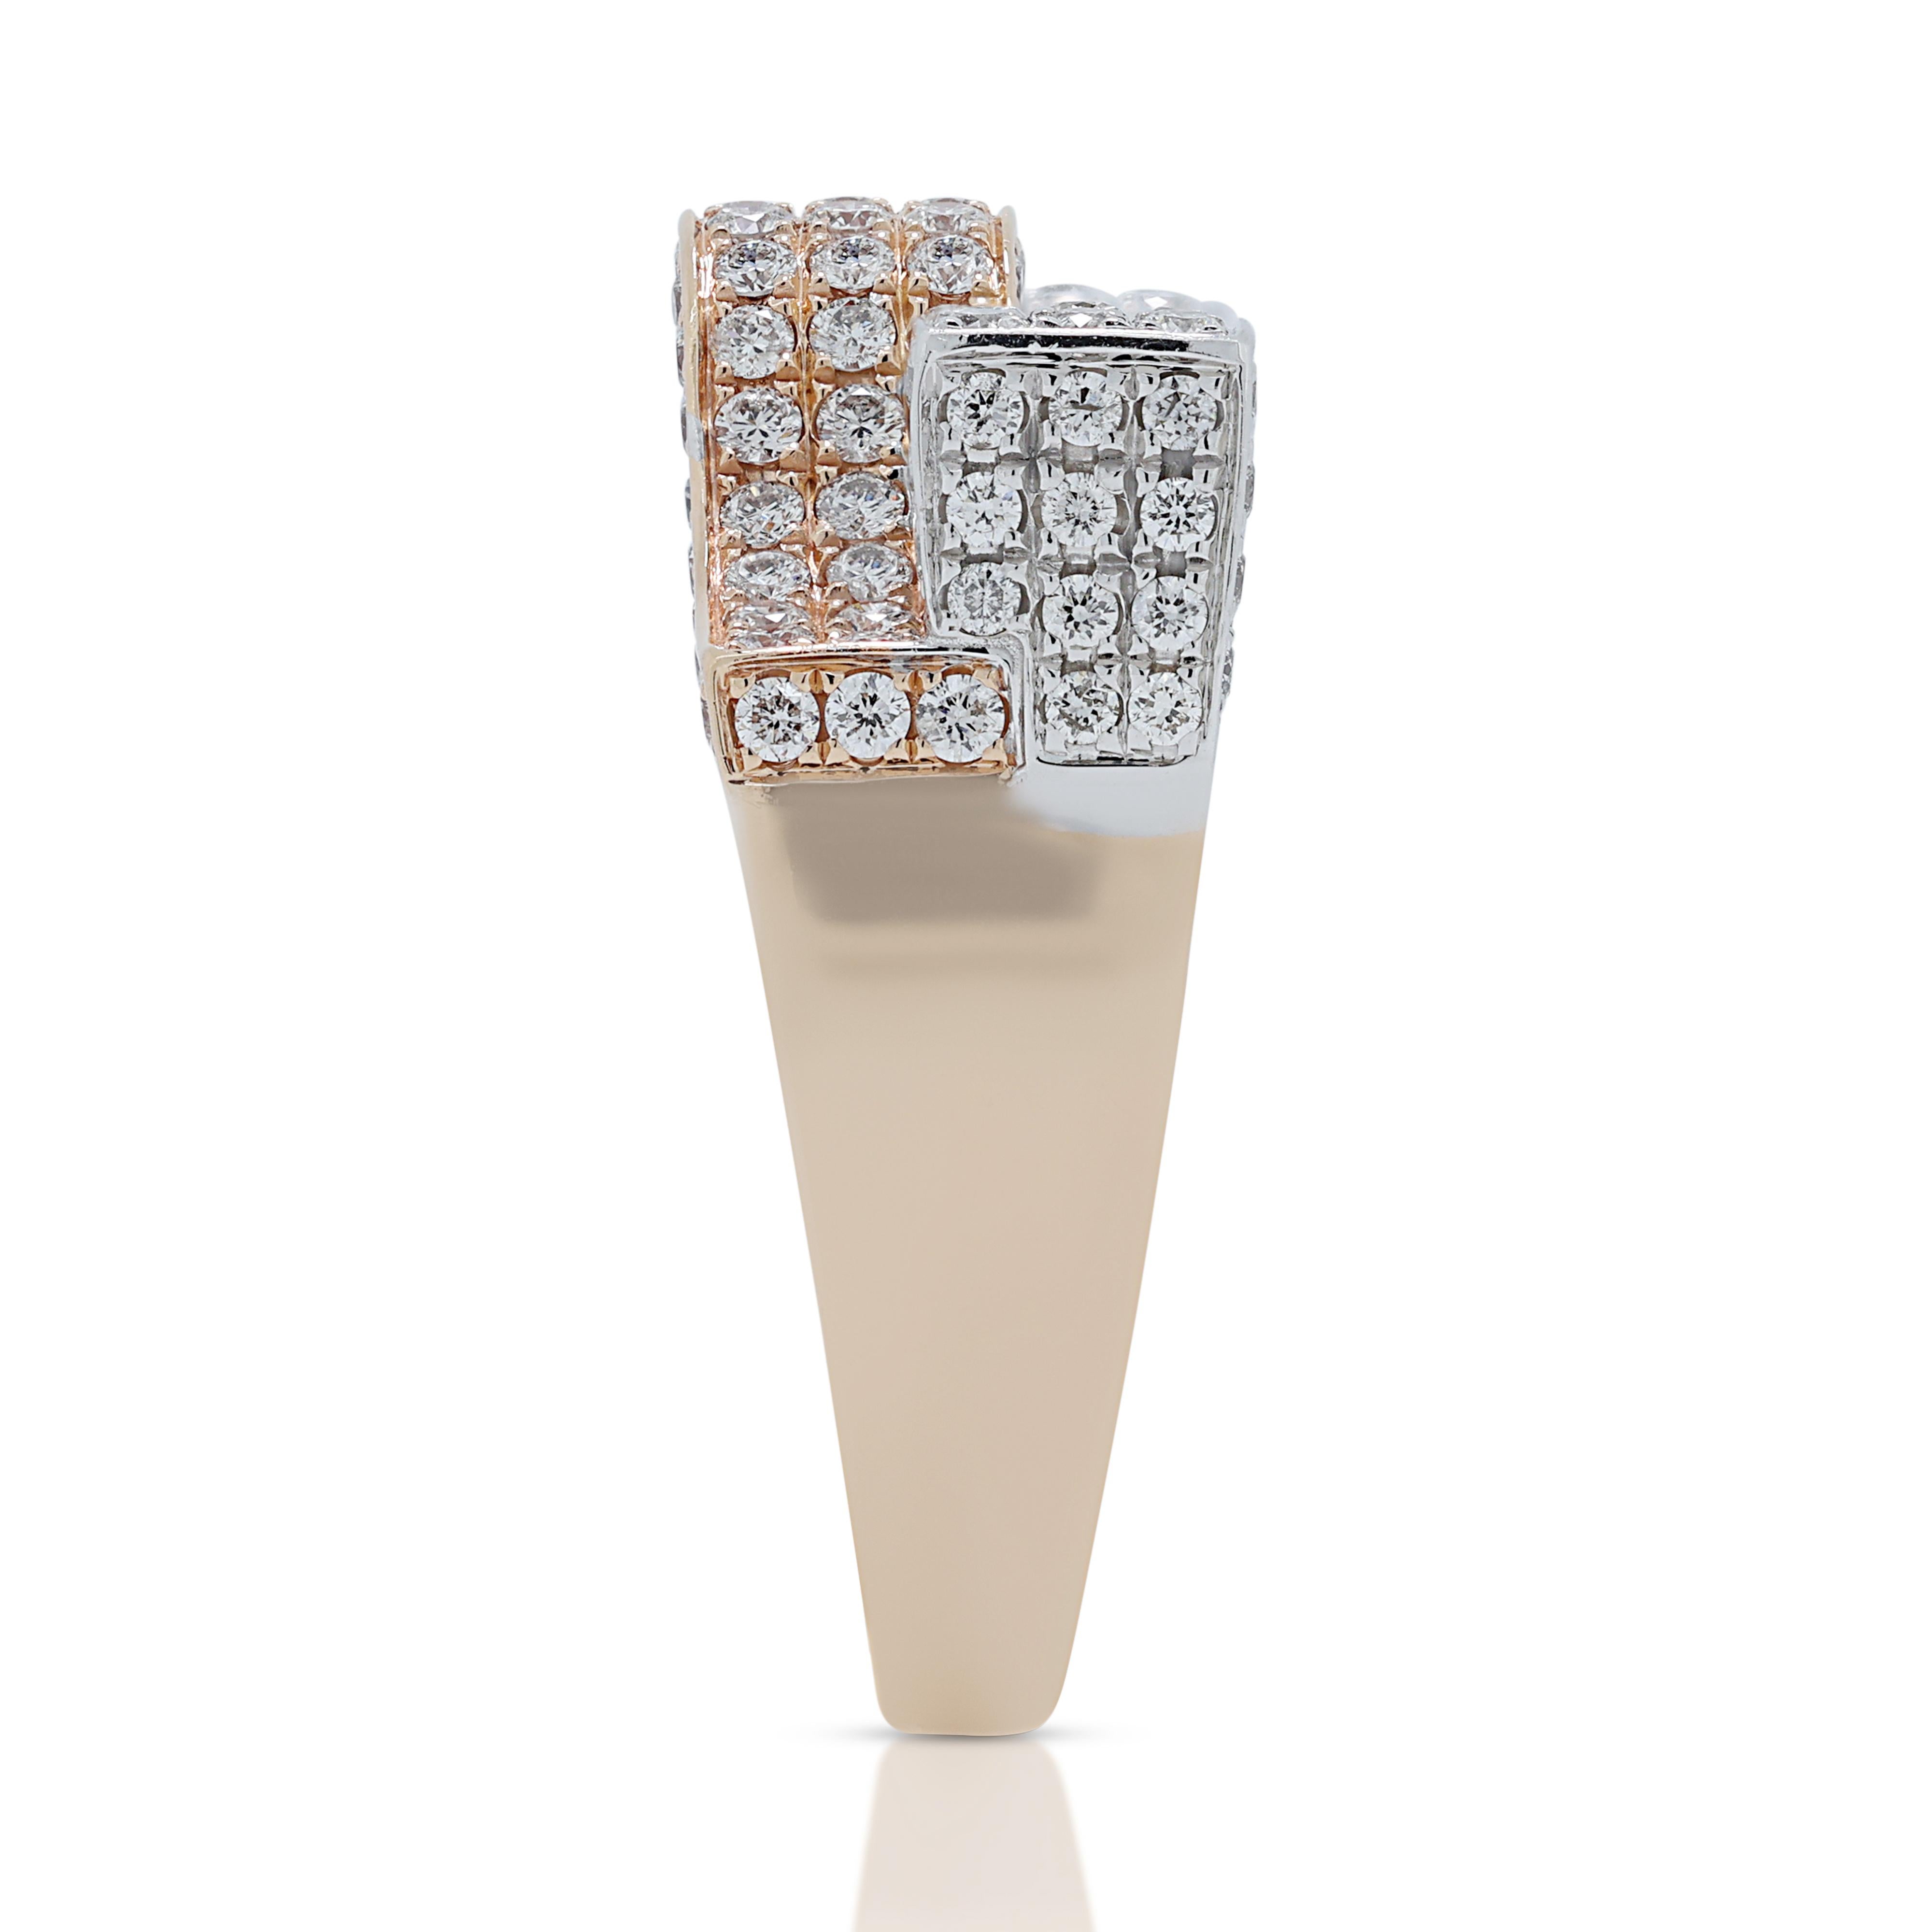 Stunning 1.60ct Diamonds Ring in 18K White & Rose Gold For Sale 1